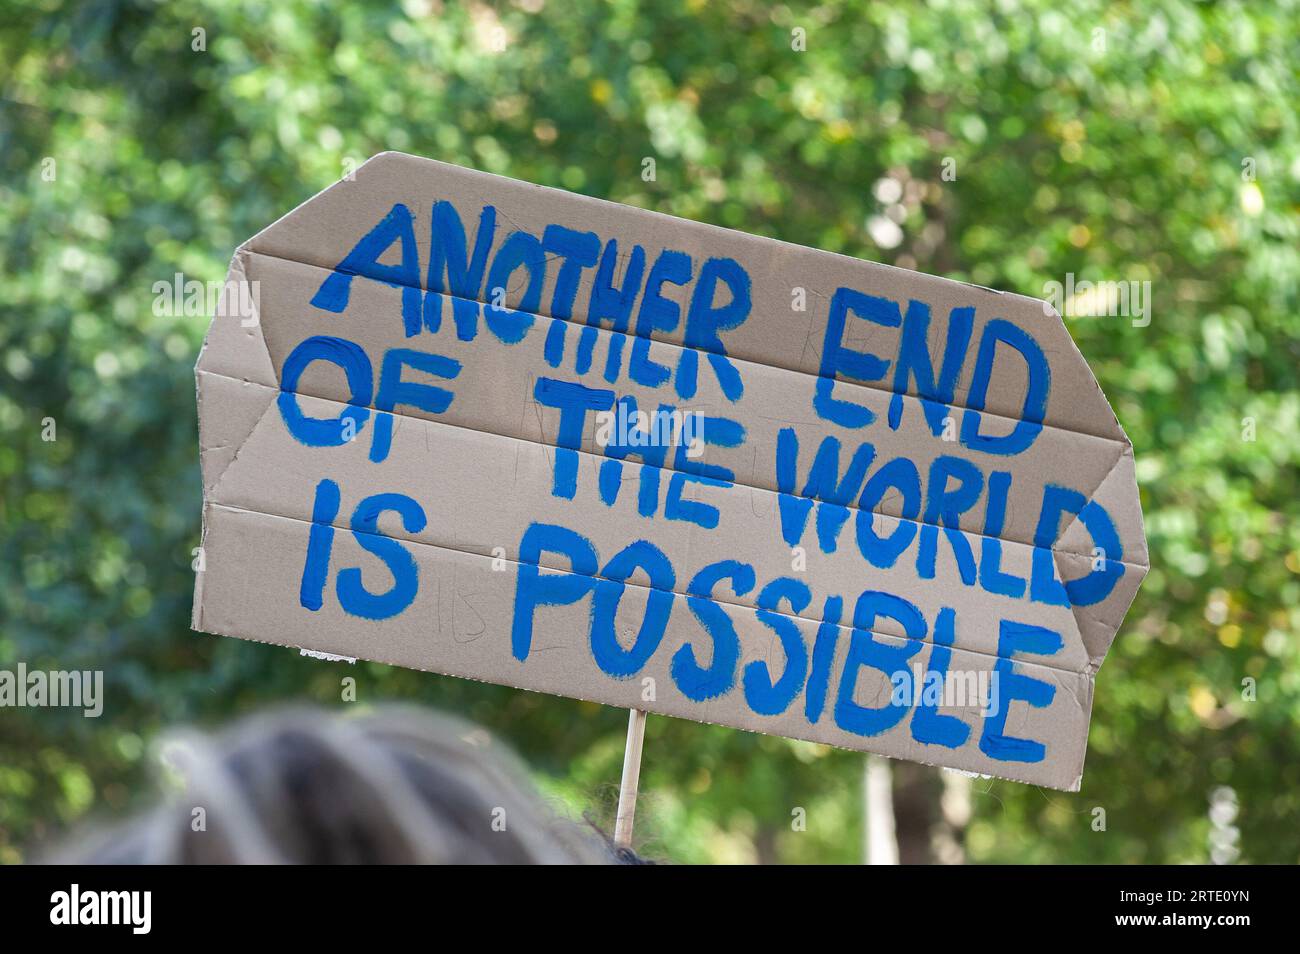 A climate activist holds a placard expressing opinion during the non-violent, sit-down demonstration on the Utrechtsebaan. Extinction Rebellion organised a blockade on the A12 motorway in The Hague this afternoon, despite a ban from the municipality. The so-called ‘frog jet’ of the German built water canon was used to disperse the protesters during their sit-down; this had very little effect as most were prepared for such an event.  According to organizer Extinction Rebellion, around 25,000 people attended the protest. Stock Photo